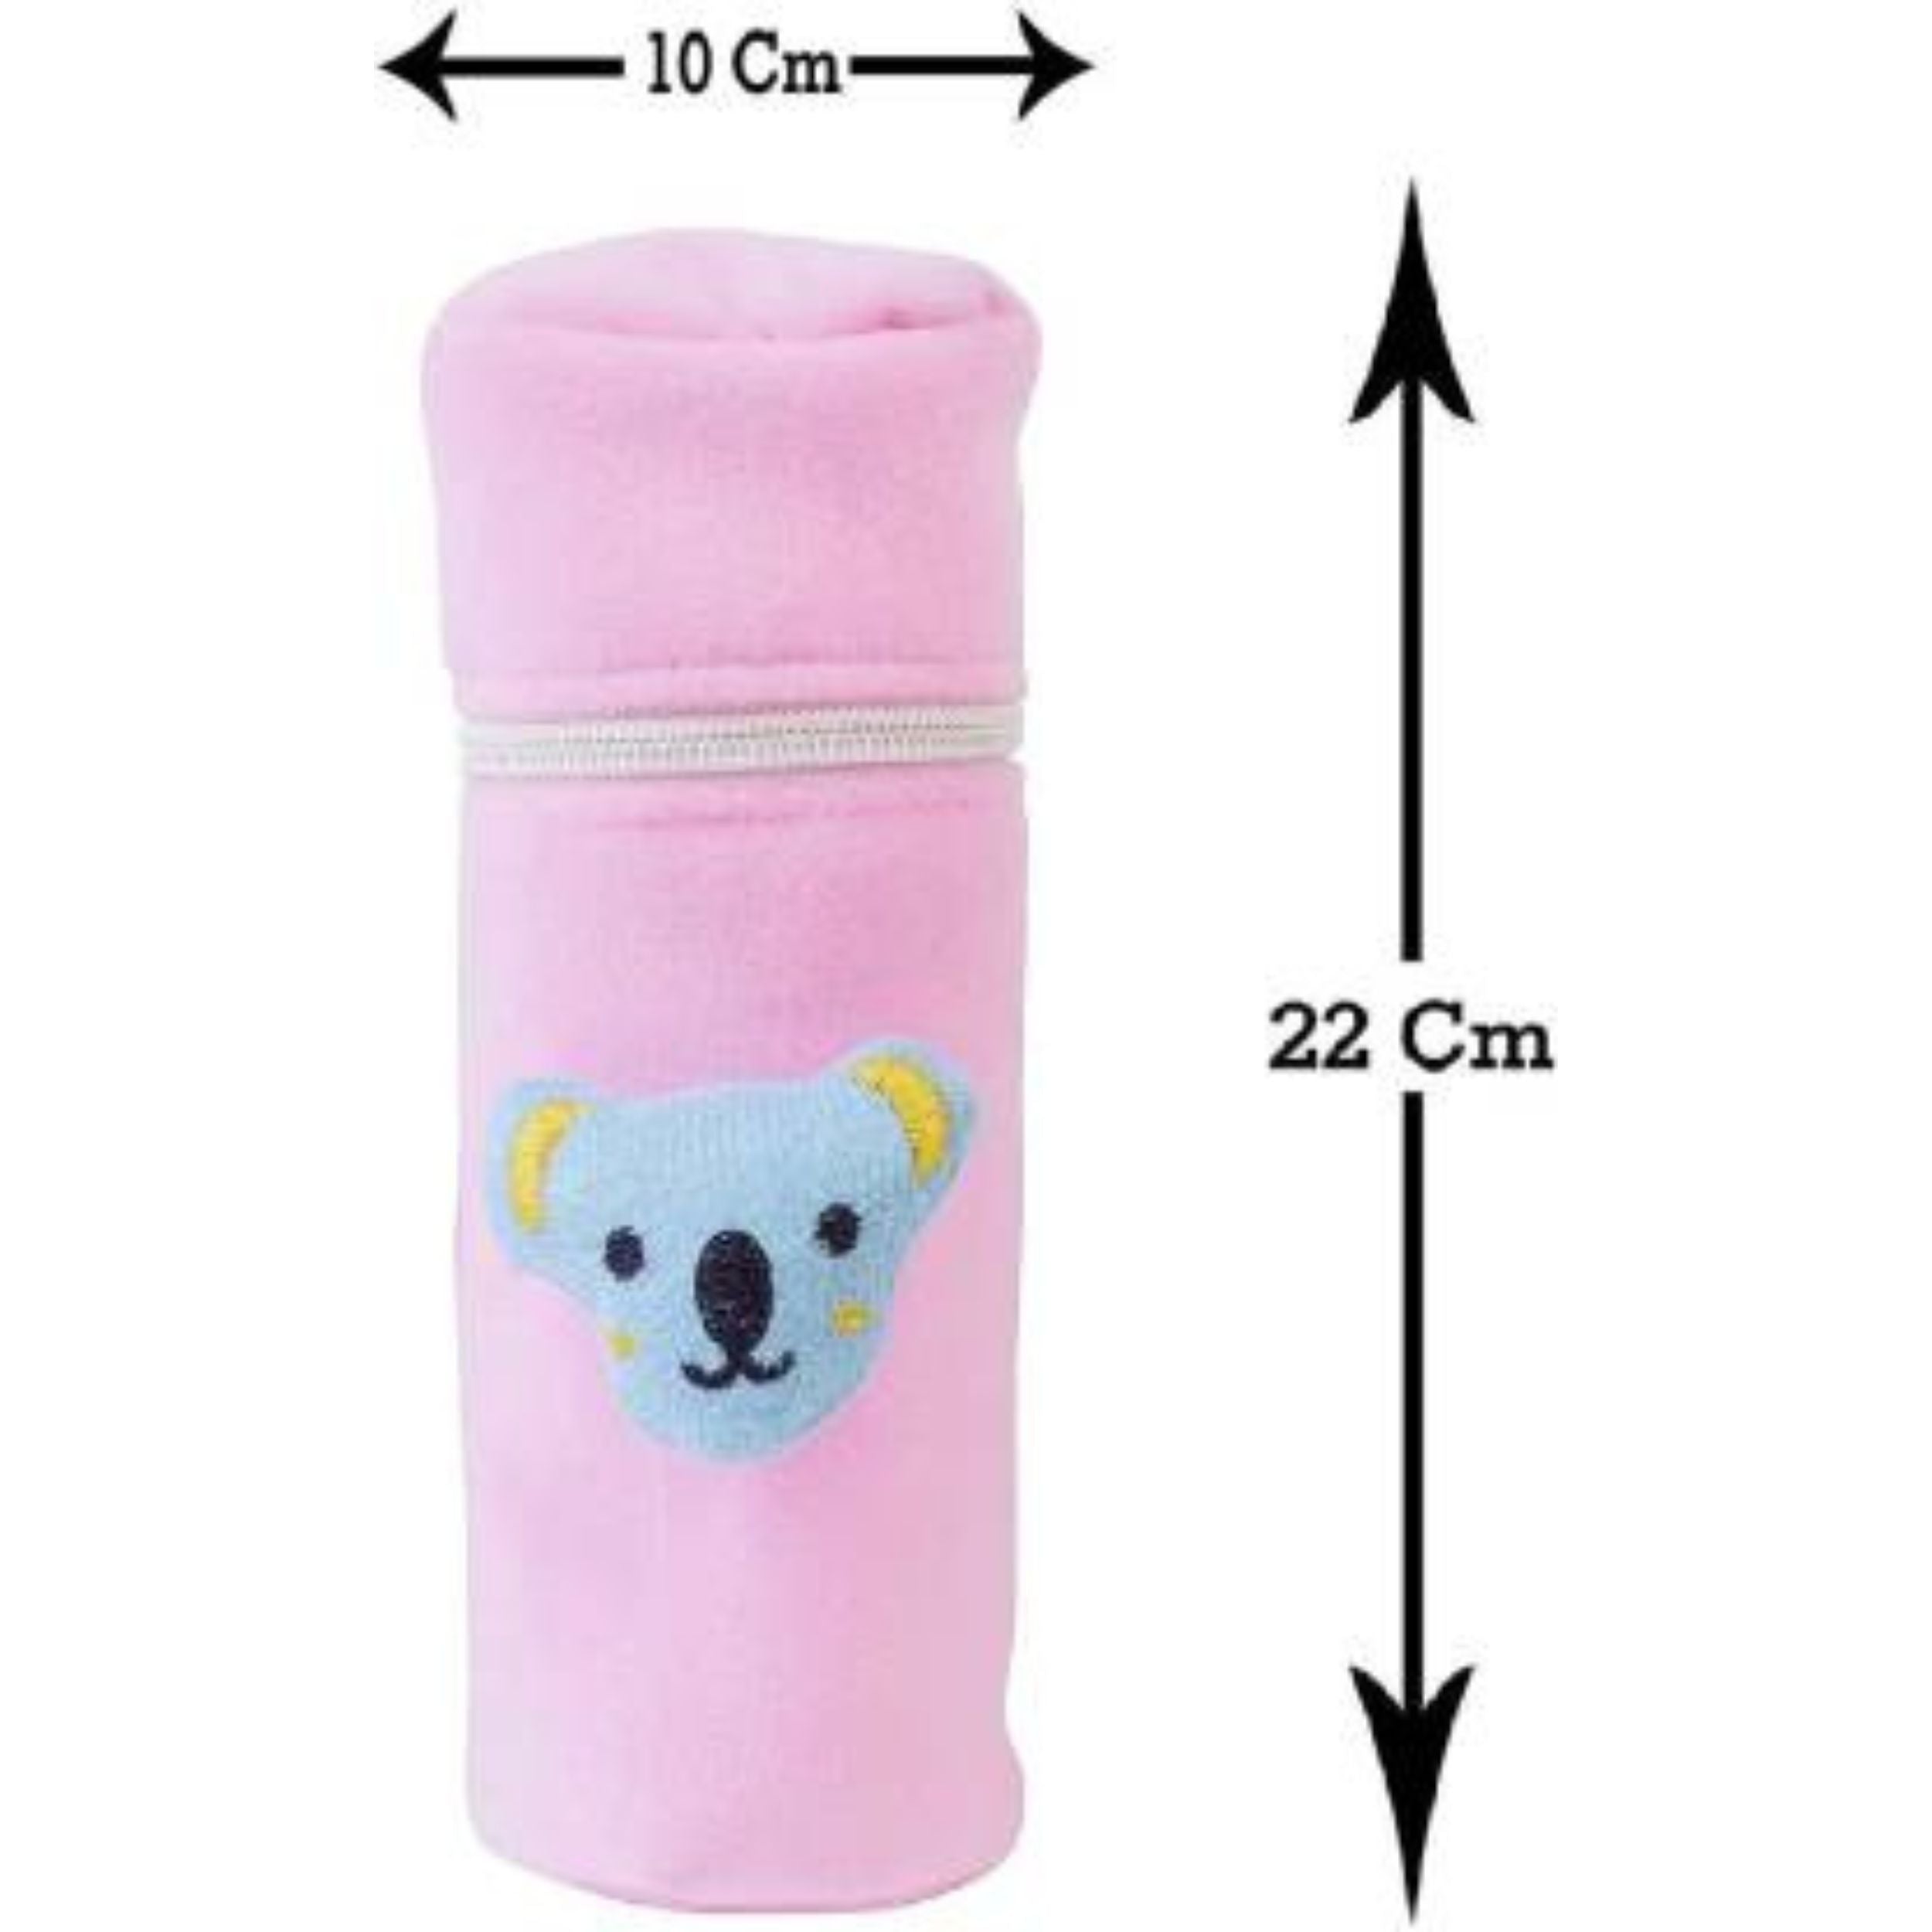 Feeding Bottle Cover with Animated Cartoon Design